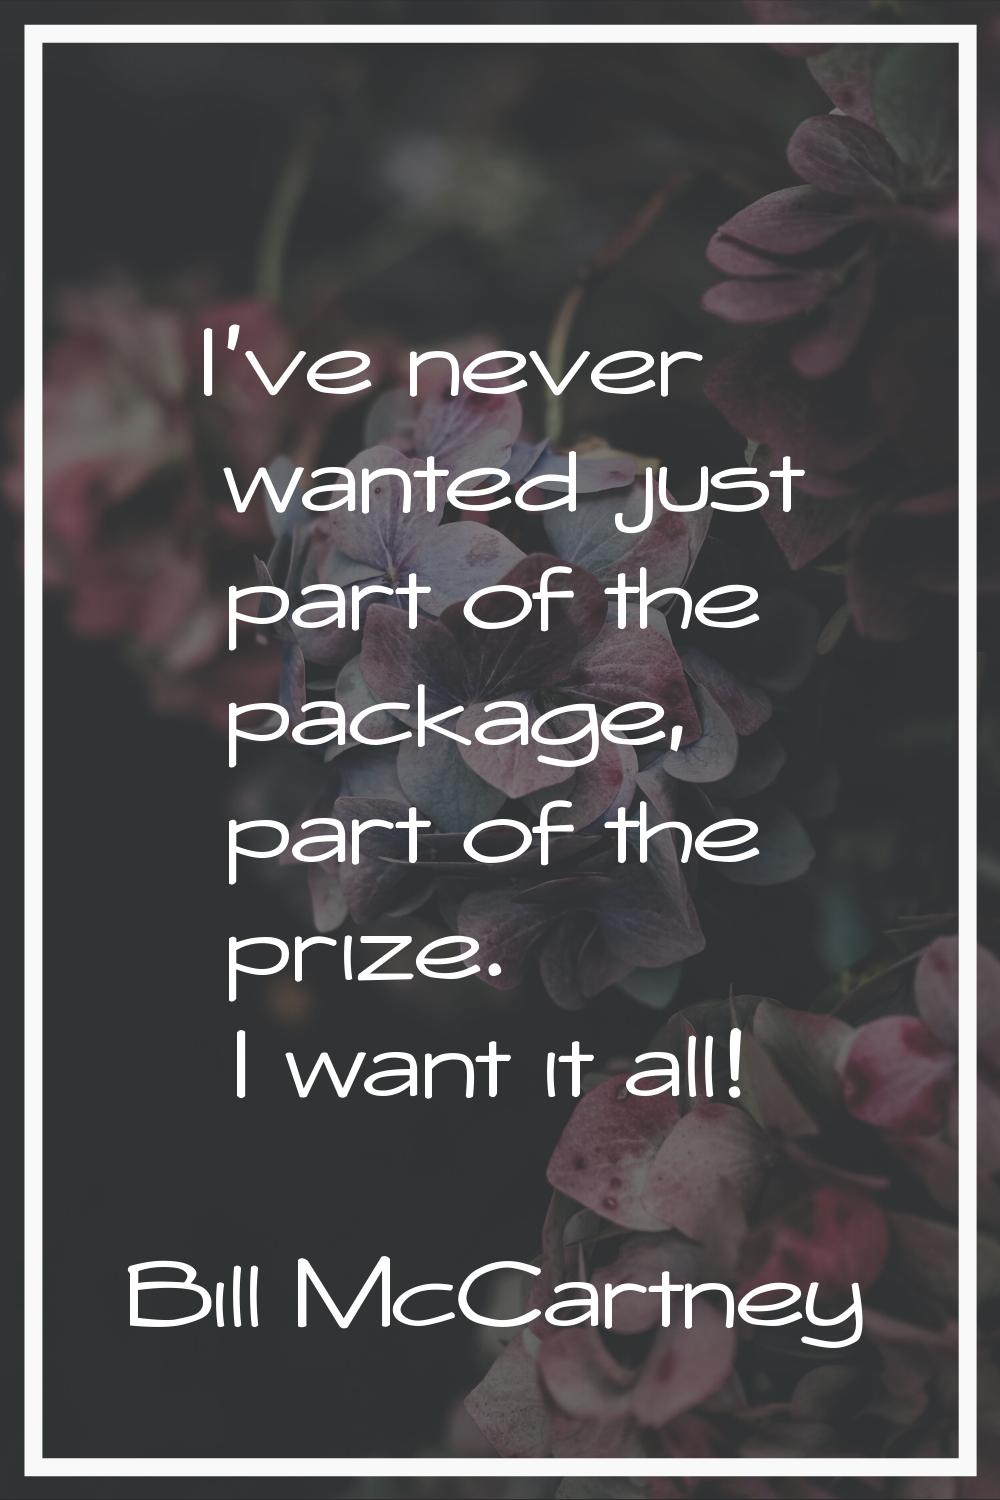 I've never wanted just part of the package, part of the prize. I want it all!